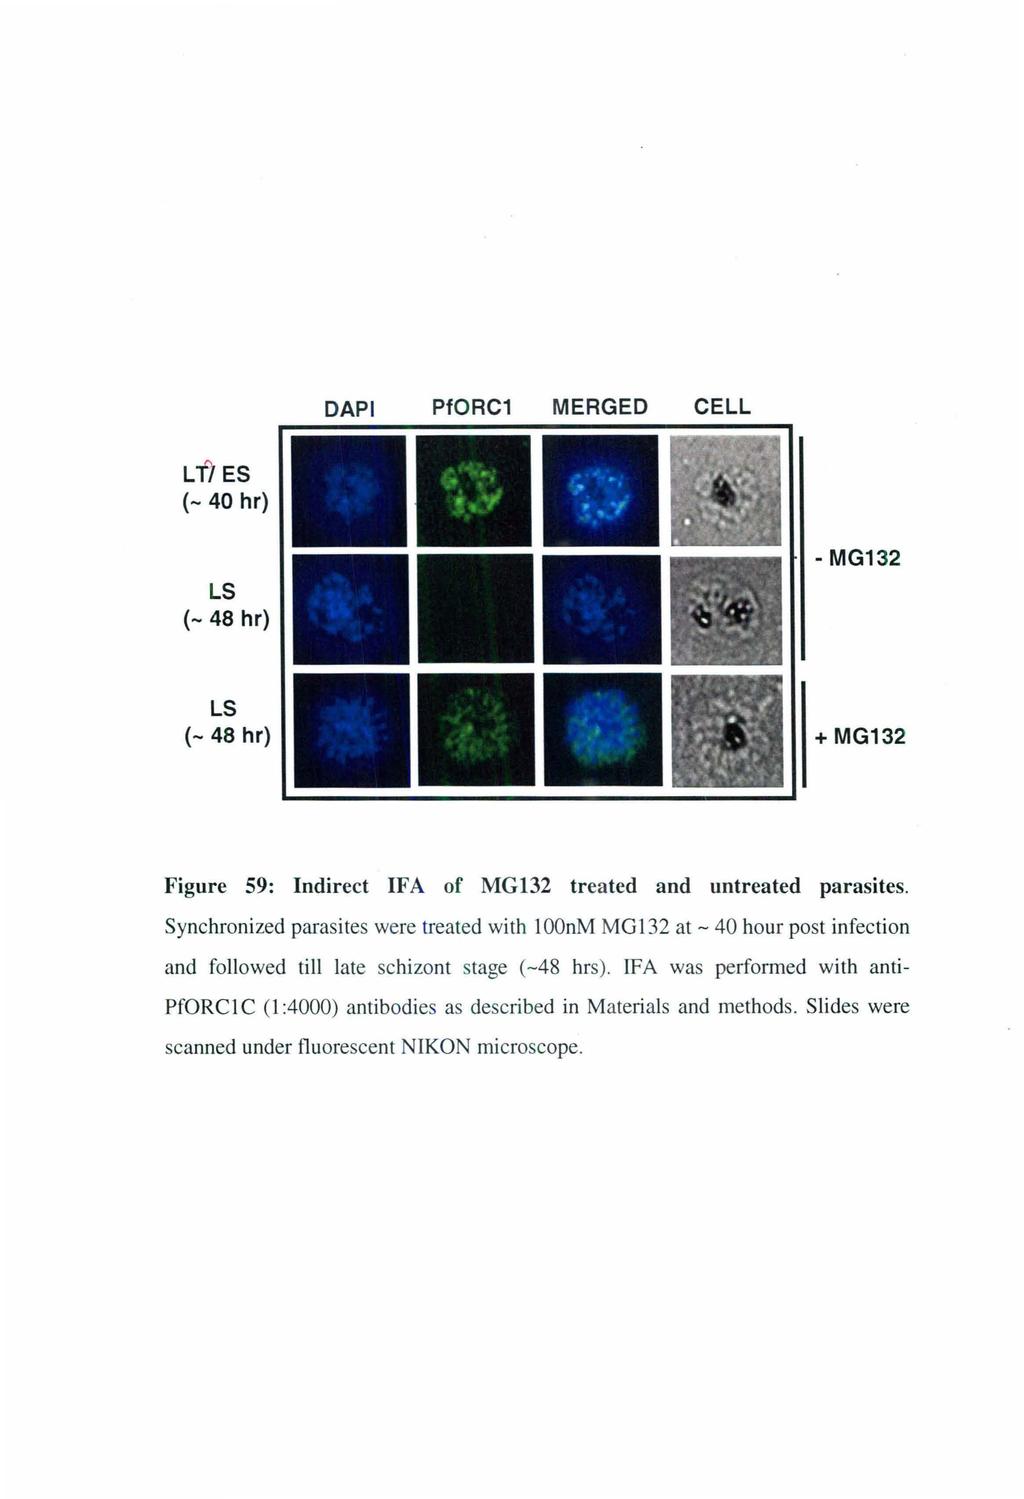 DAPI PfORC1 MERGED CELL Lfl ES (- 40 hr) LS (- 48 hr) - MG1 32 LS (- 48 hr) + MG132 Figure 59: Indirect IF A of MG 132 treated and untreated parasites.